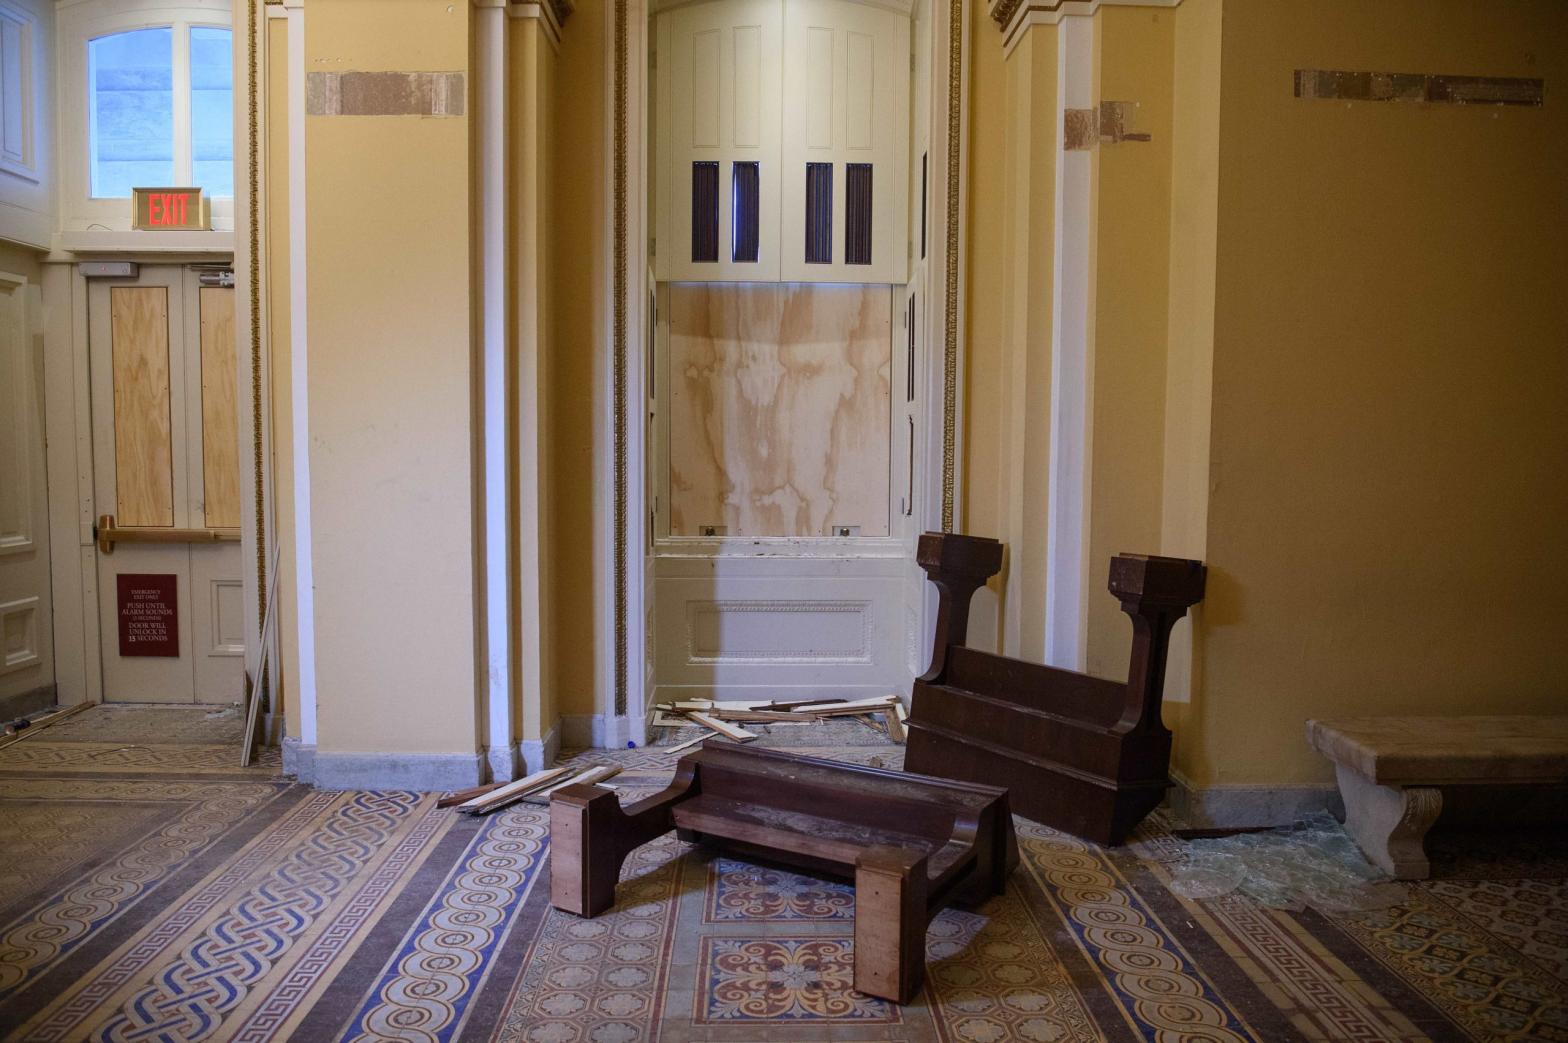 Overturned furniture and broken glass litter a hallway of the US Capitol in Washington, DC, on January 7, 2021, one day after supporters of outgoing President Donald Trump stormed the building. (Photo: Nicholas Kamm, Getty Images)